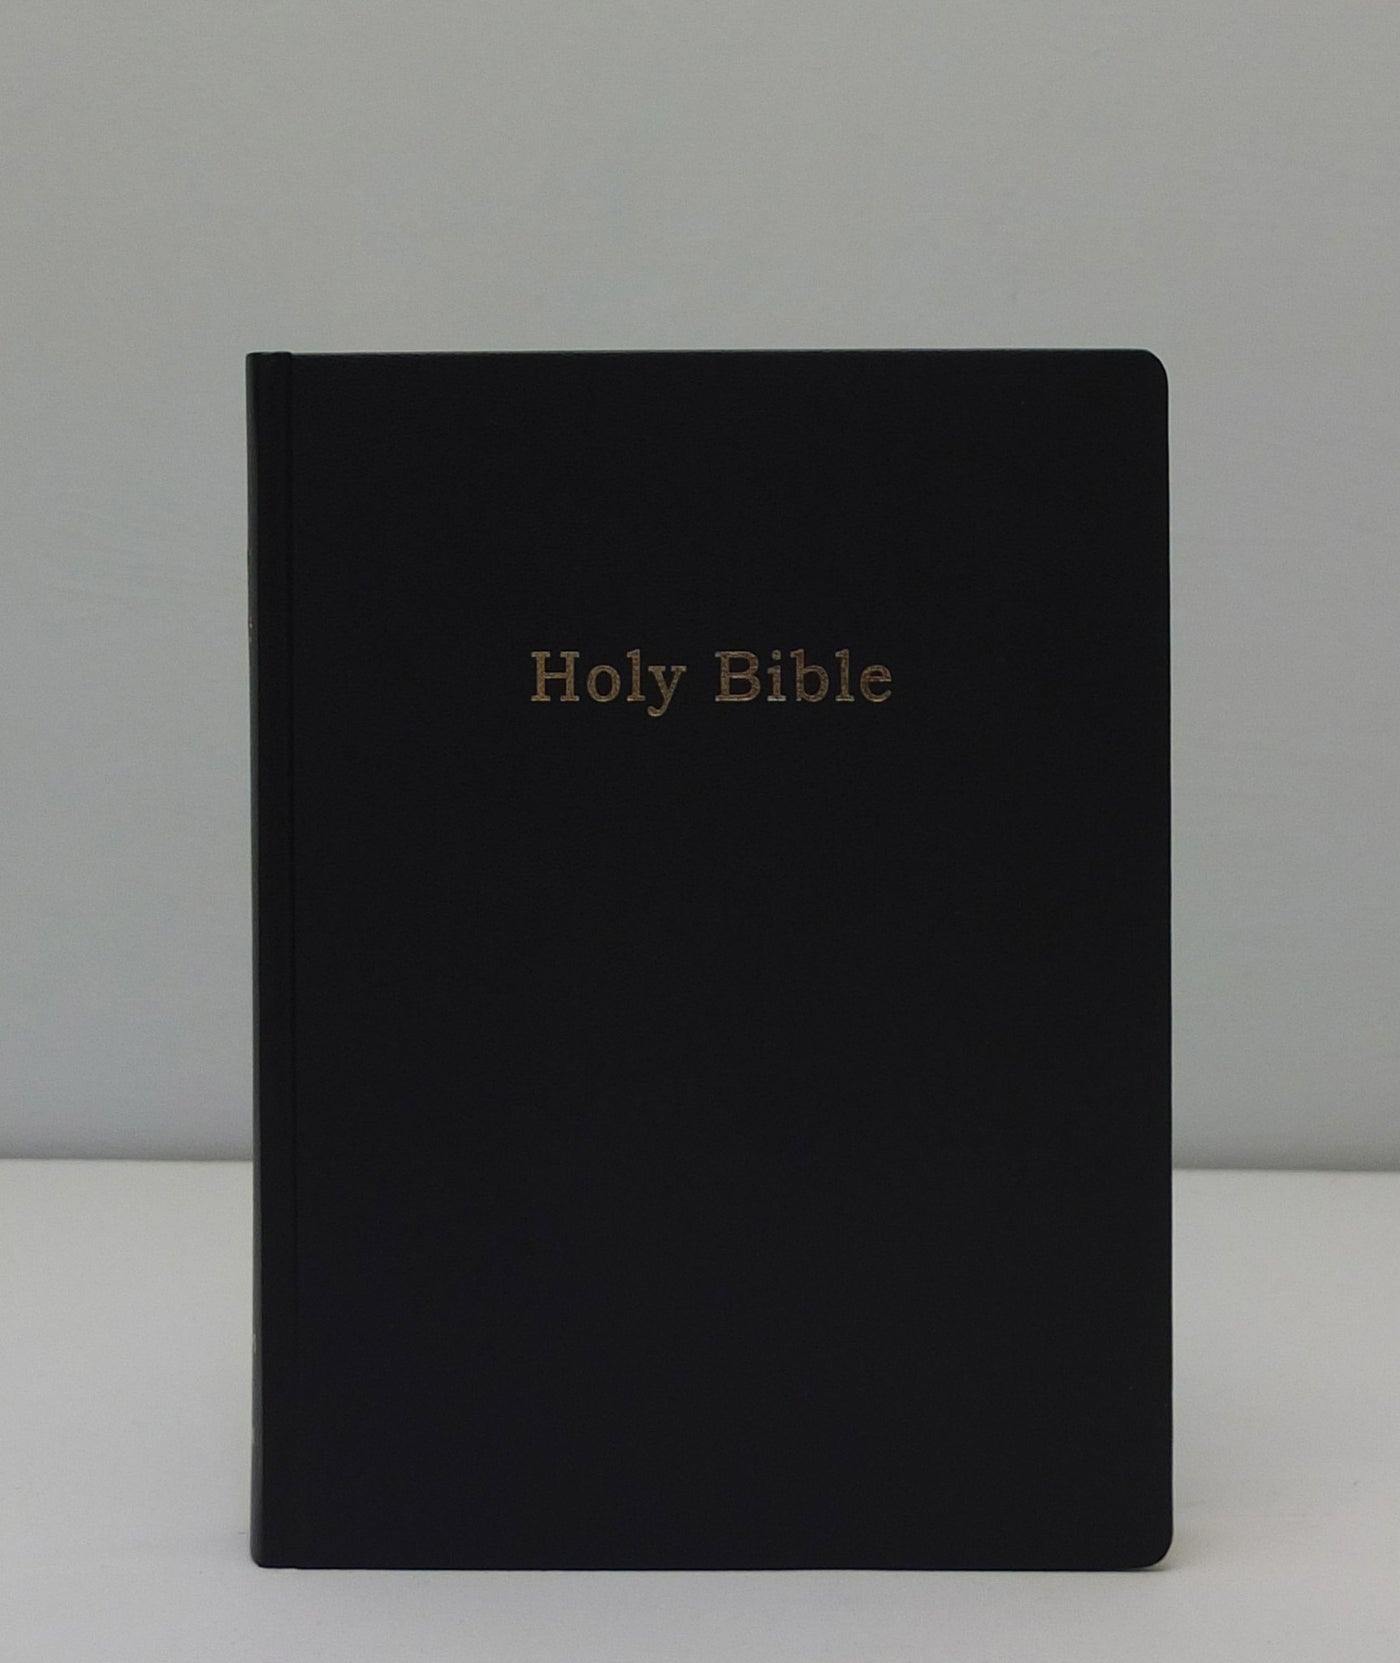 Holy Bible by Adam Broomberg & Oliver Chanarin}